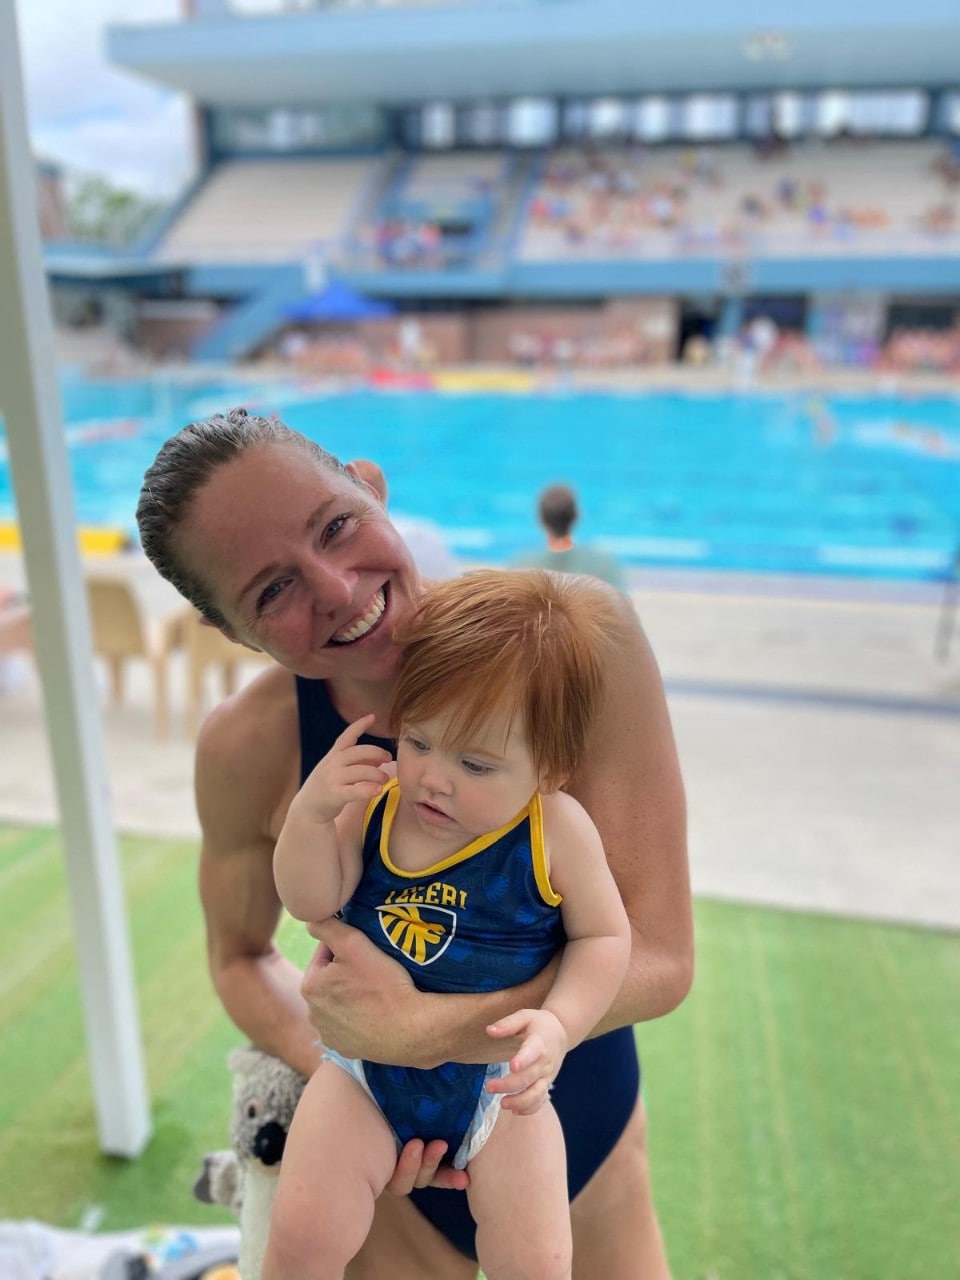 A woman in a swimming costume holds a baby beside a swimming pool.